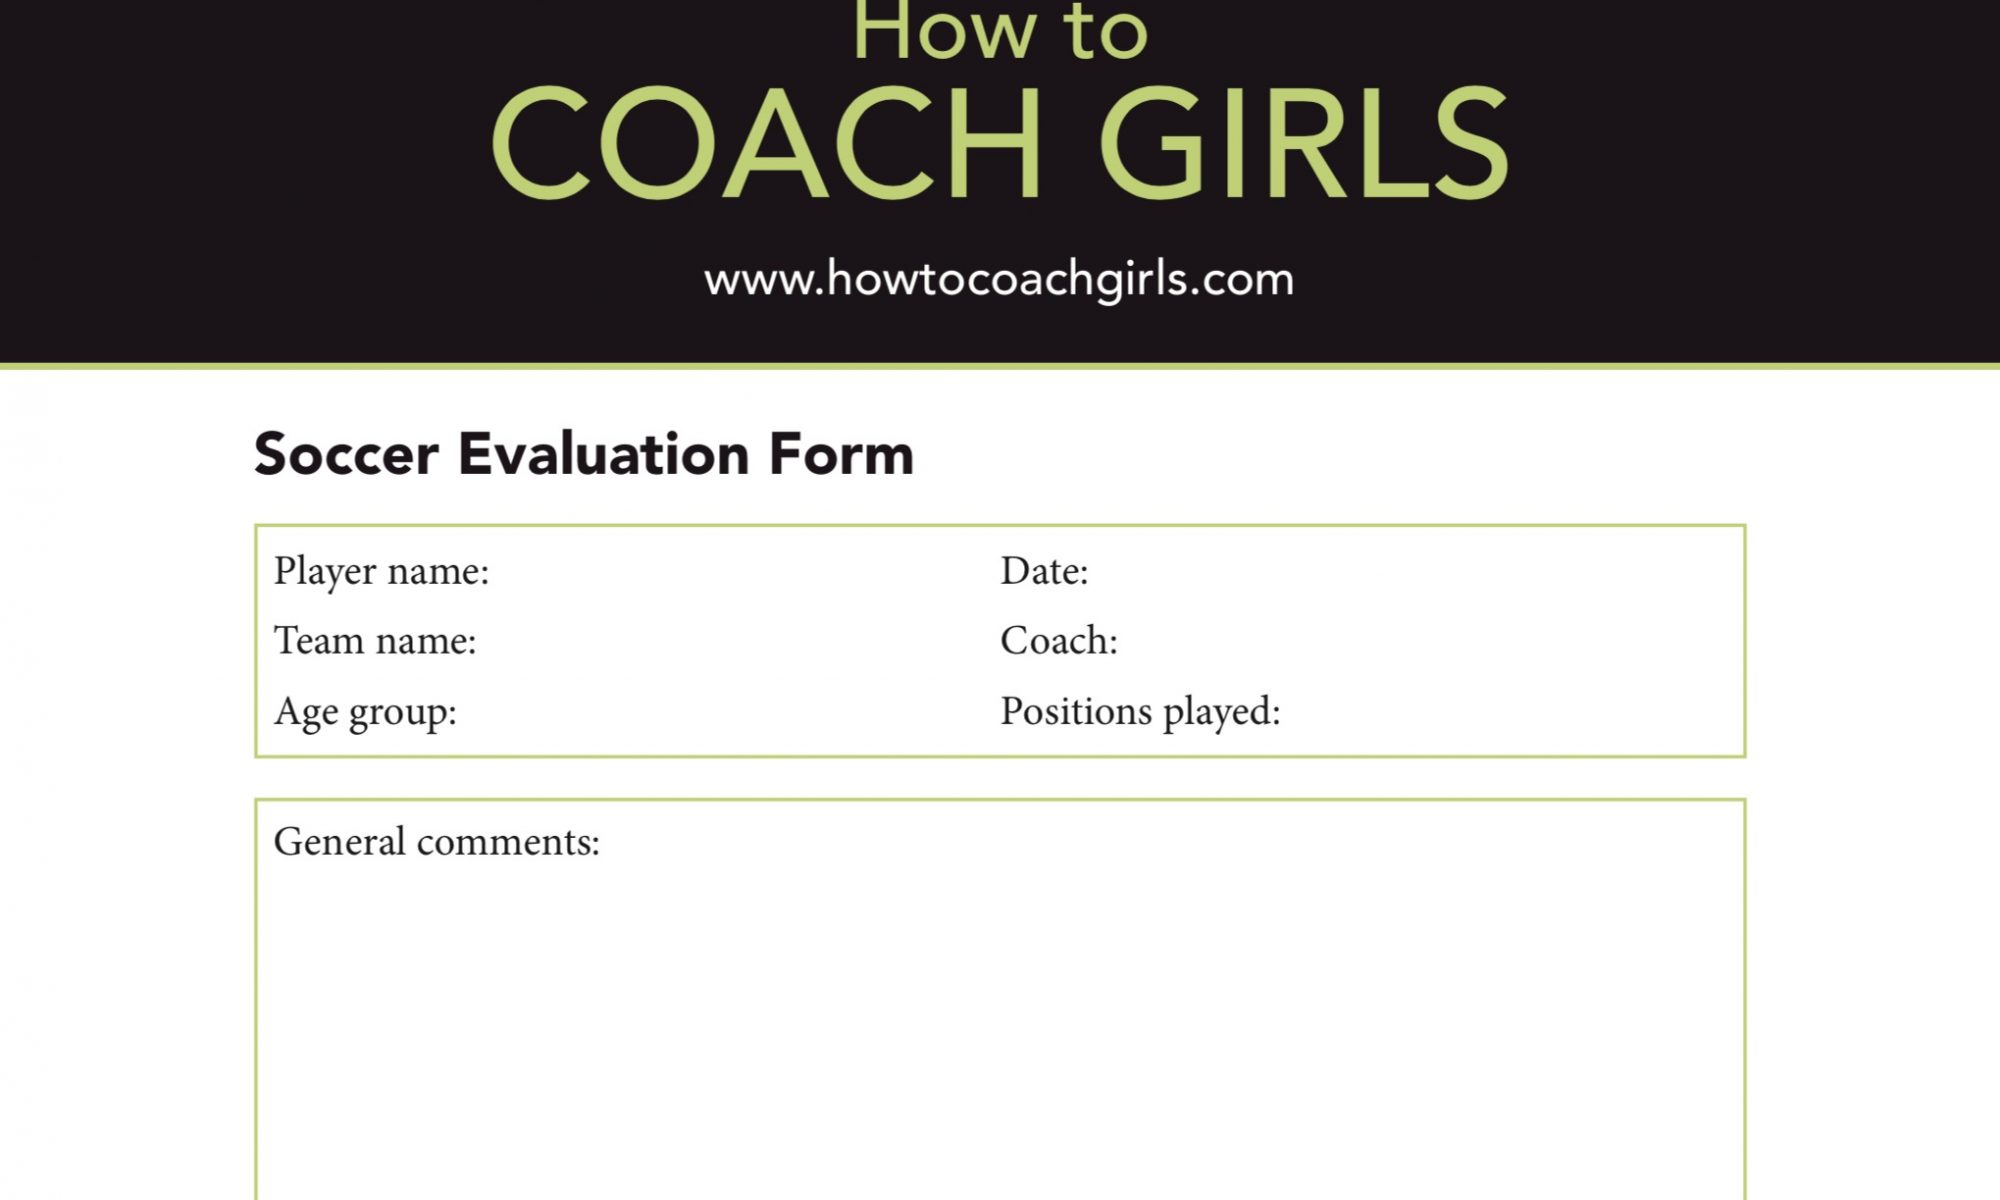 Free Downloadable Soccer Player Evaluation Form For Coaches How To Coach Girls